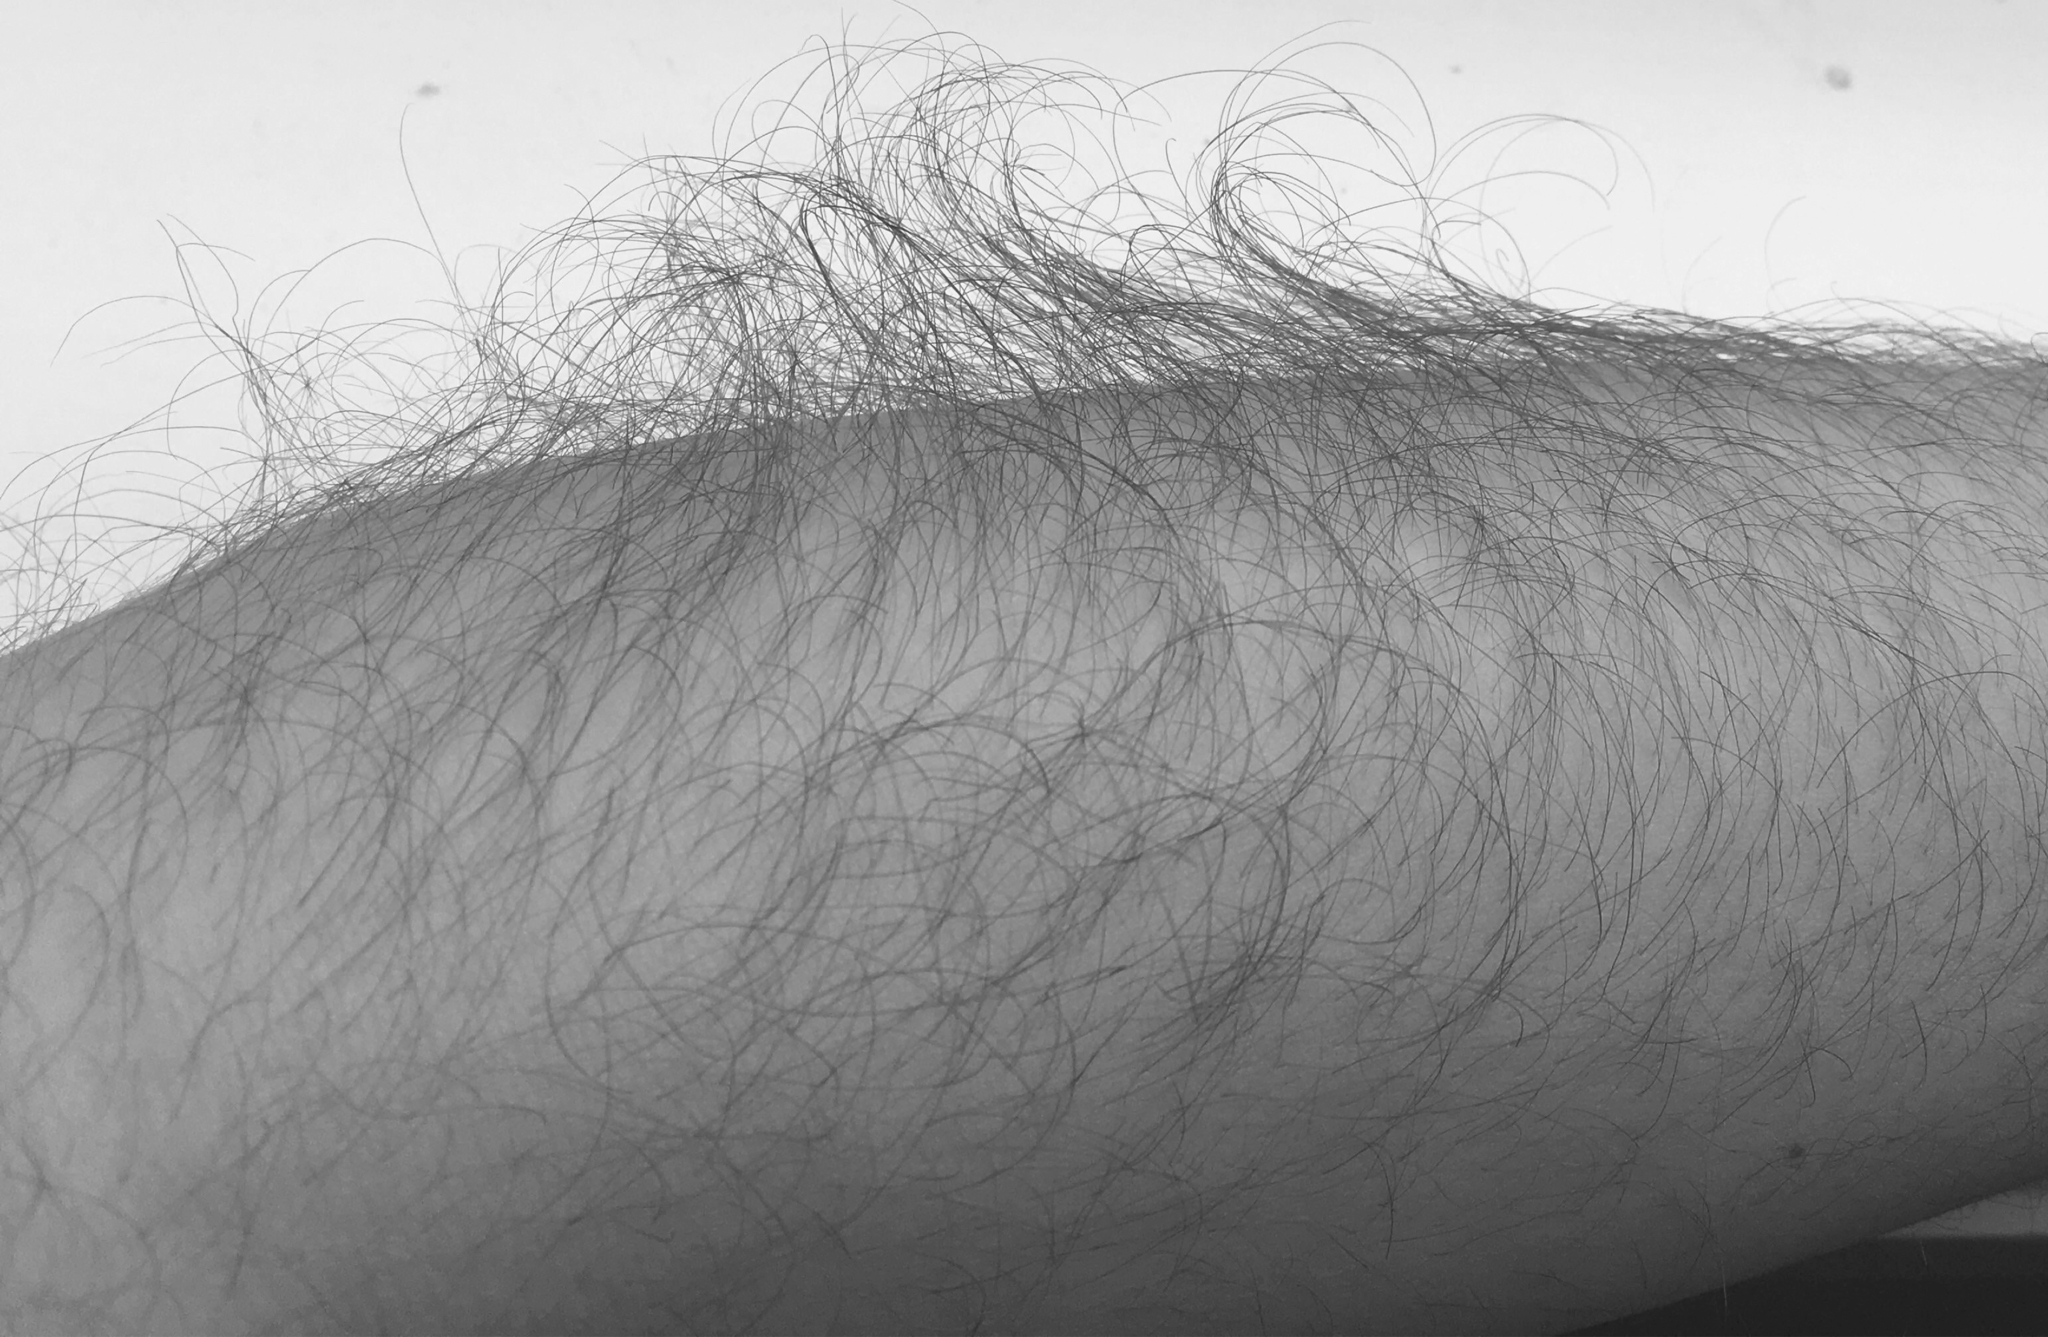 Hairy Arms Archives Empowering Hairy Women